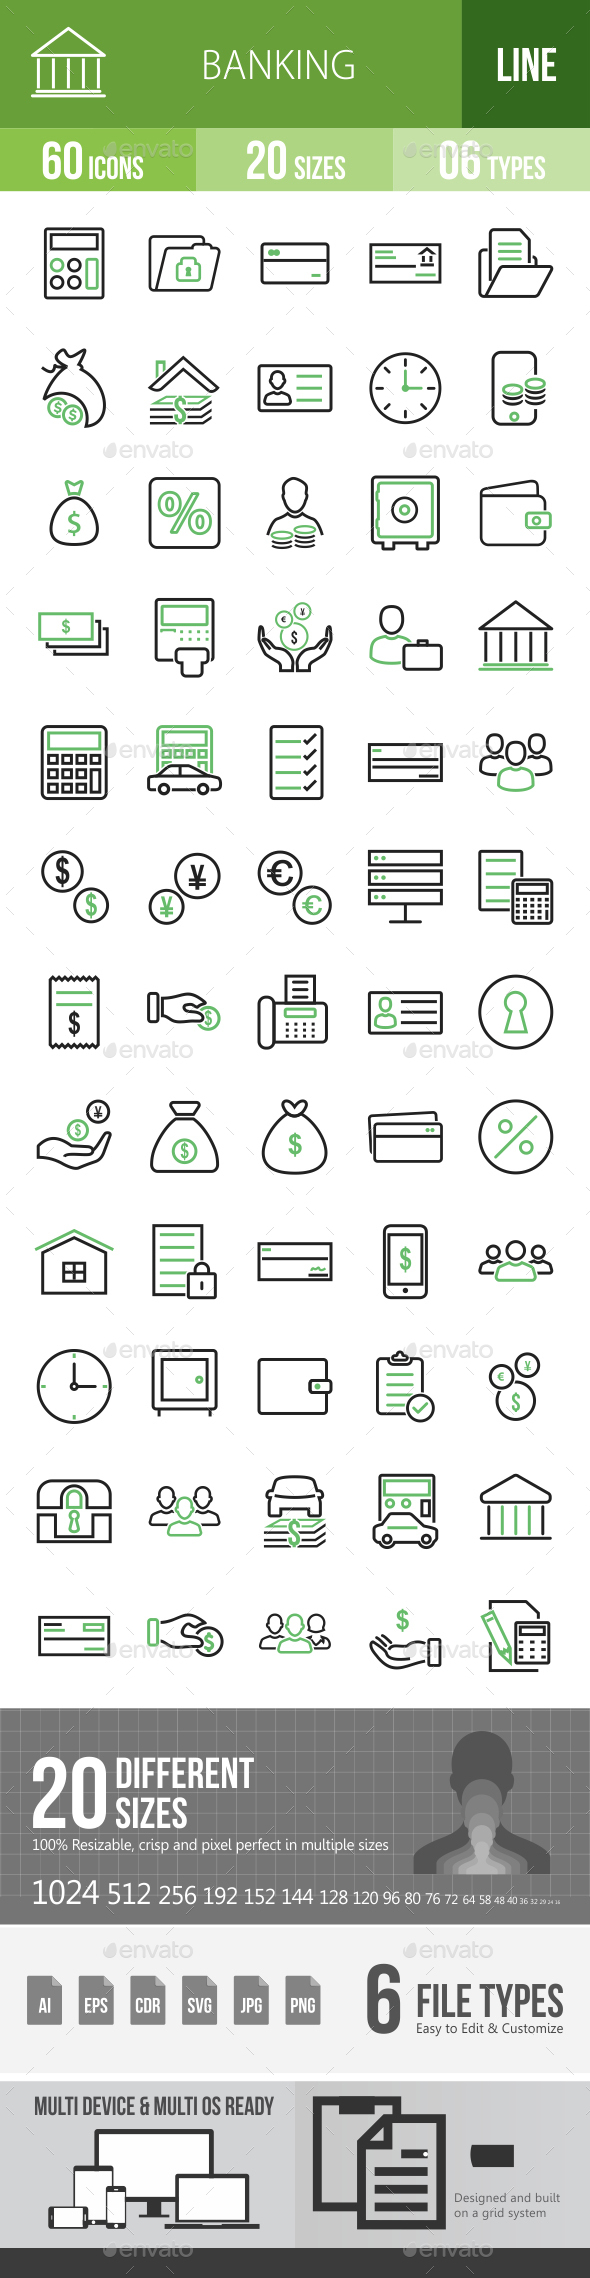 60 Banking Green & Black Line Icons